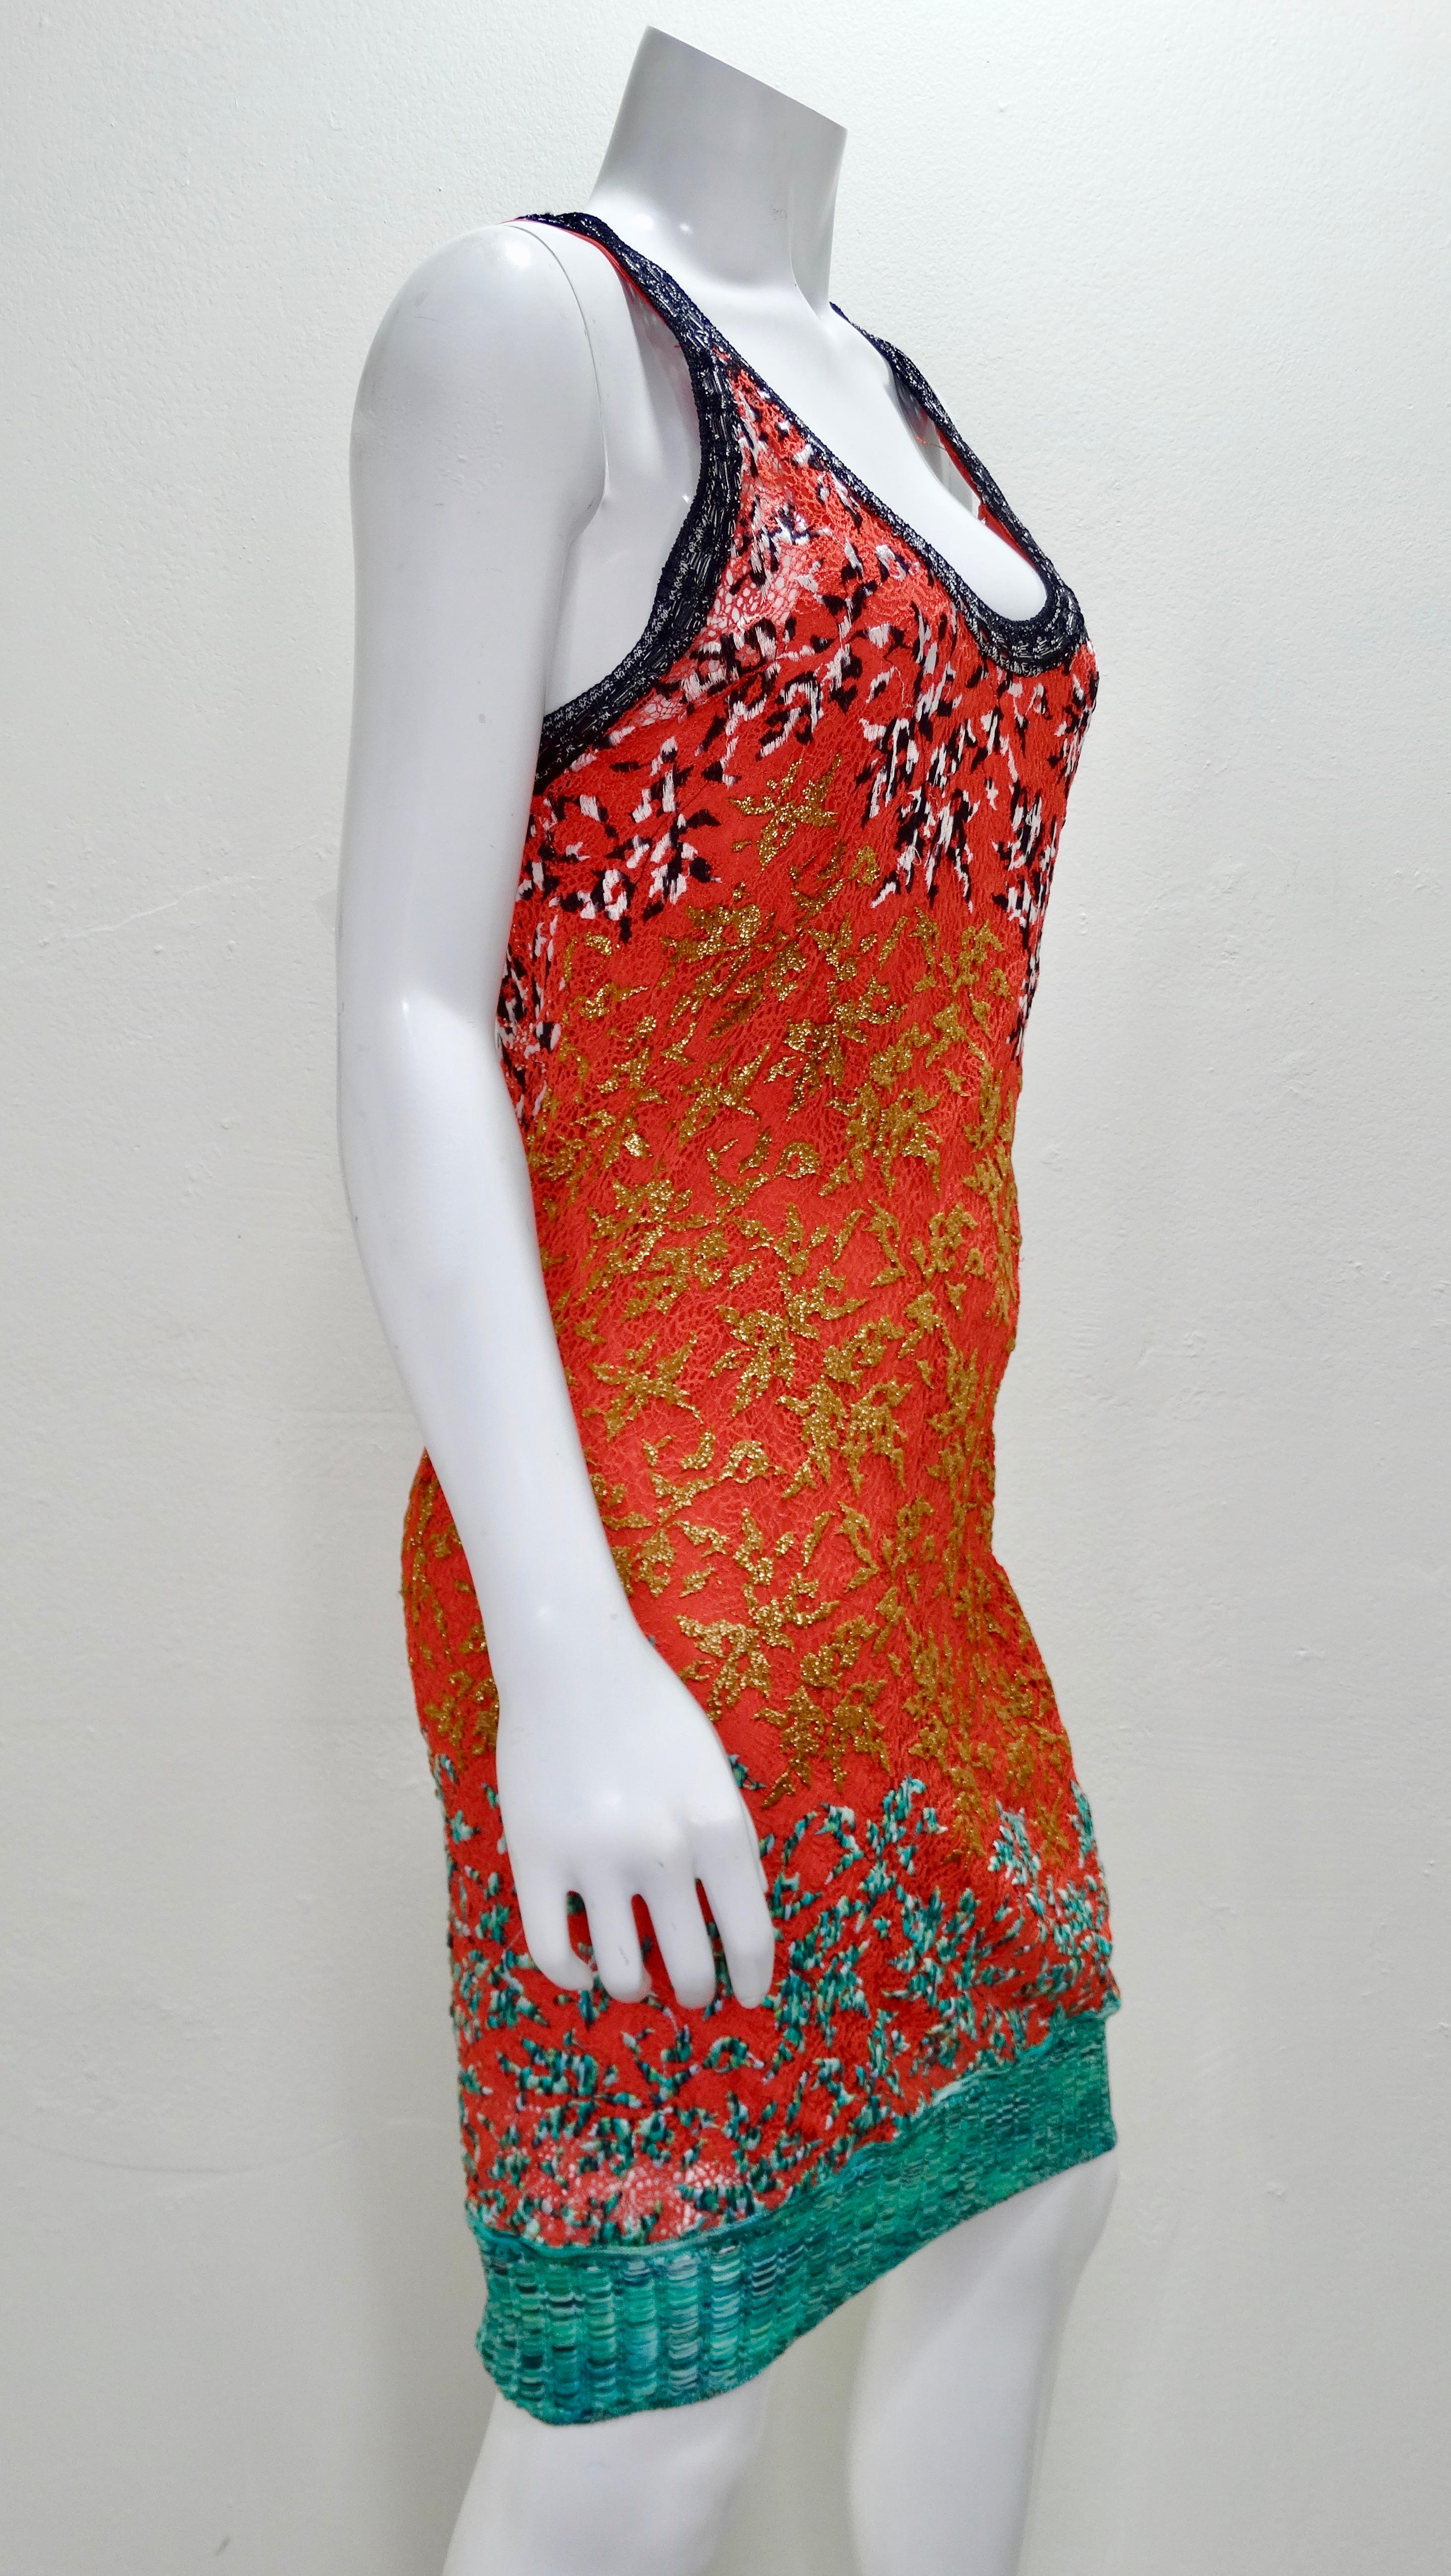 Searching For Some Missoni In Your Life? Look no further! This 1970's crochet Missoni dress features a multi-colored abstract motif all throughout with a signature Missoni hem. Scoop neckline, tank top straps and a coral colored slip underneath.